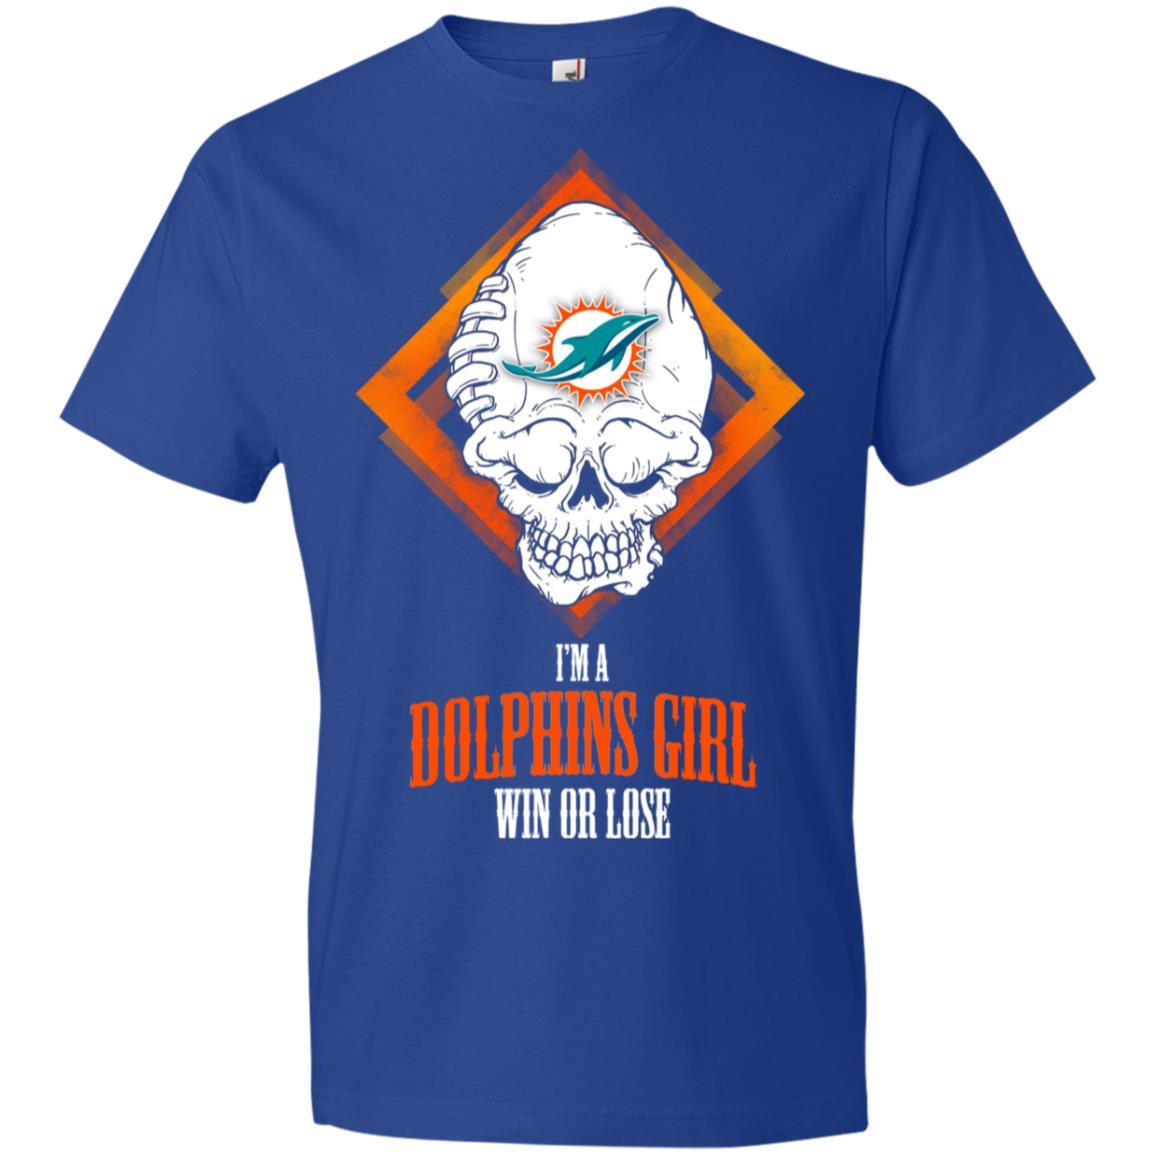 Miami Dolphins Shop - Miami Dolphins Girl Win Or Lose Tee Shirt Halloween Gift